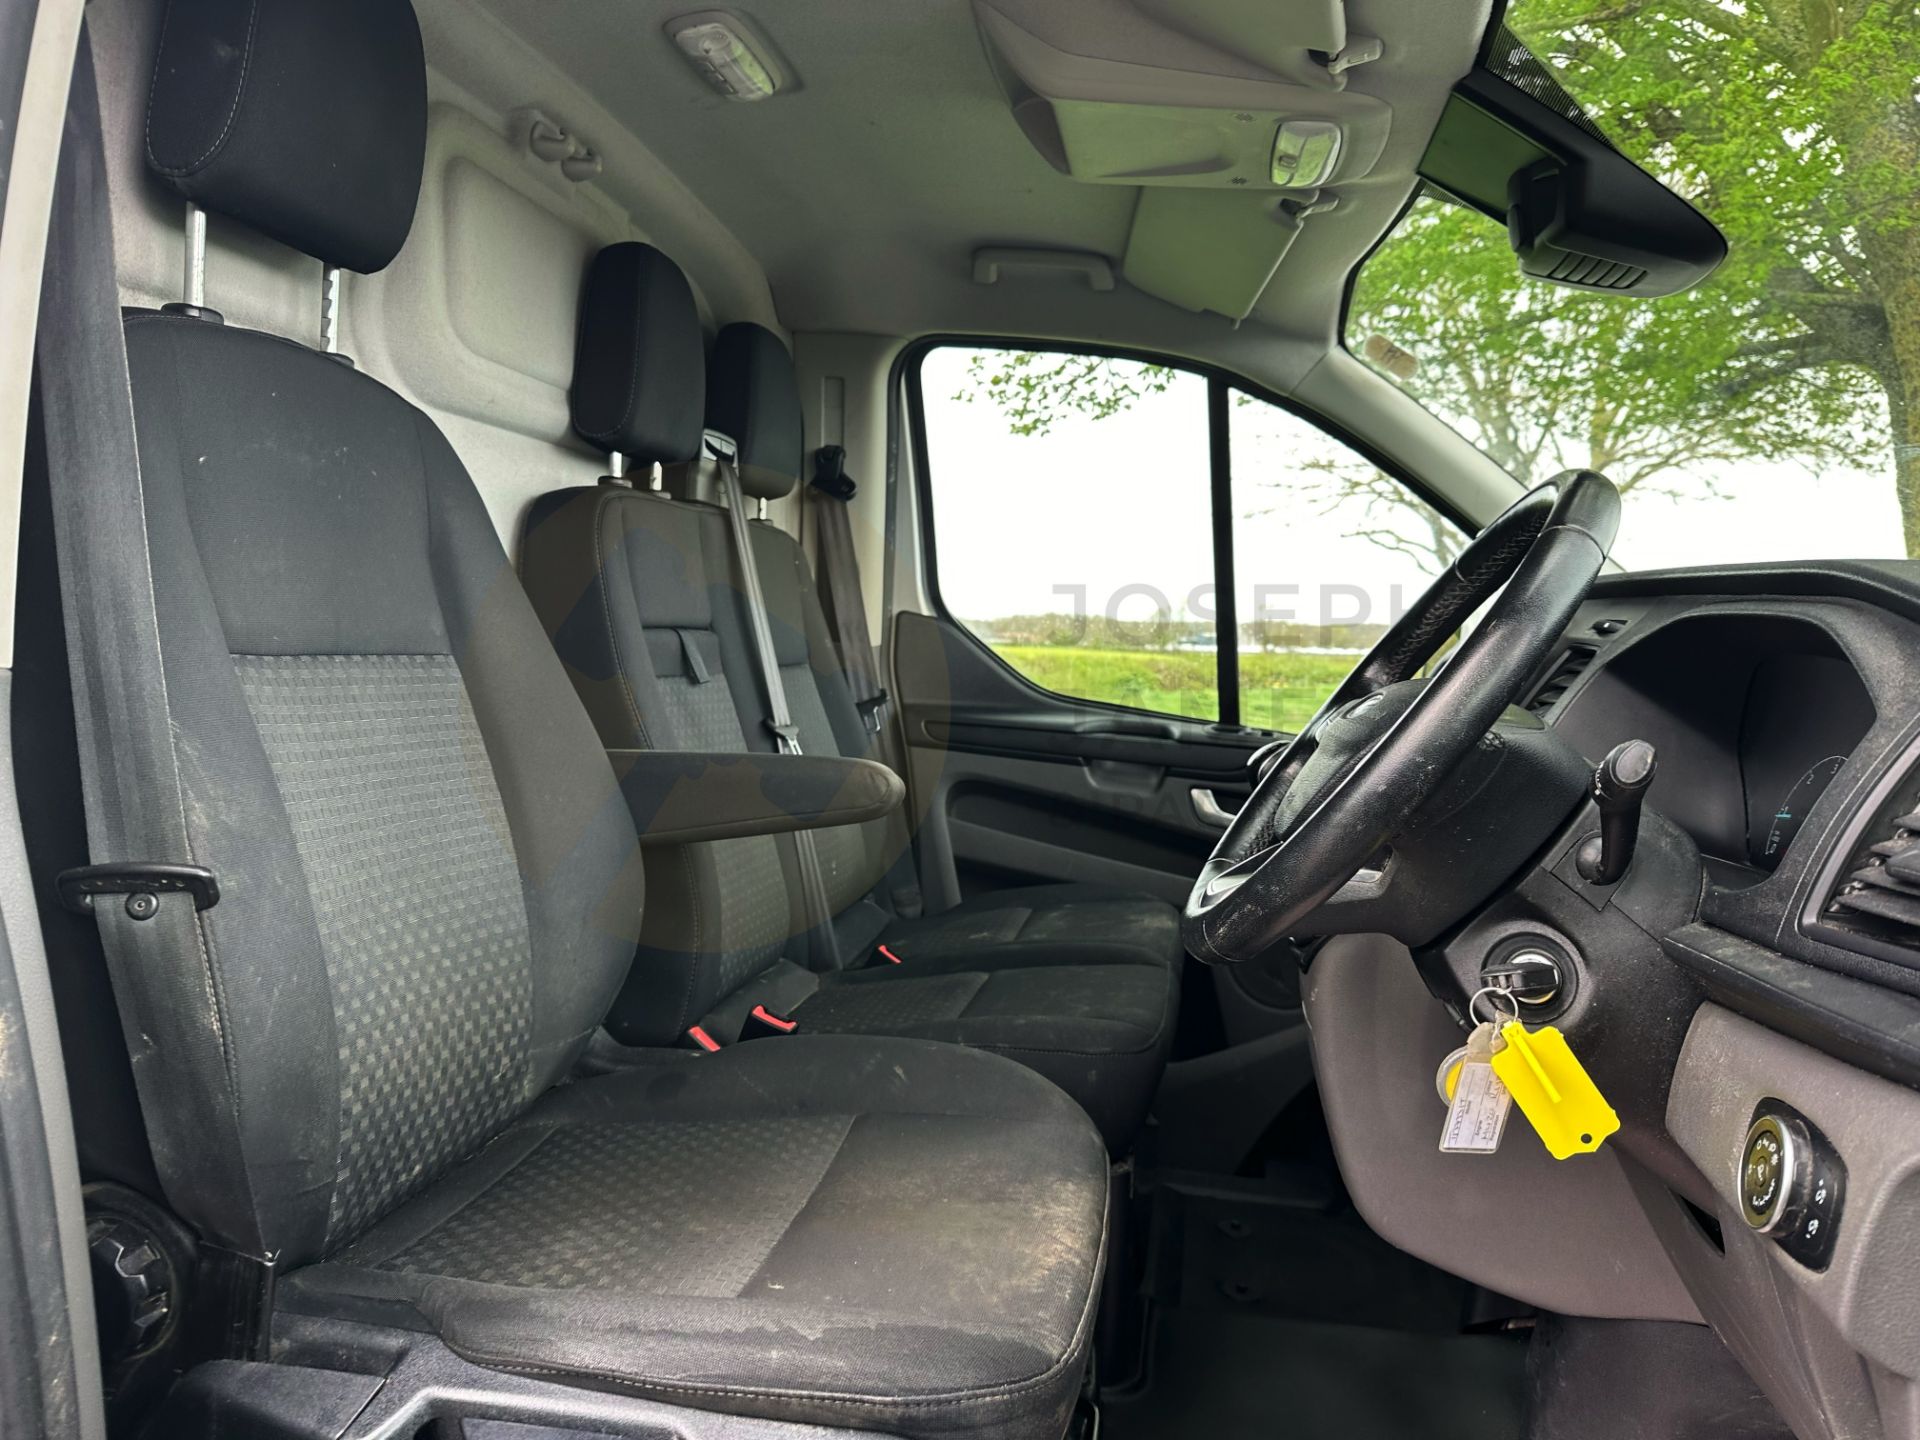 FORD TRANSIT CUSTOM "TREND" 2.0TDCI (130) 20 REG -1 OWNER- SILVER -GREAT SPEC -LOW MILEAGE - Image 25 of 38